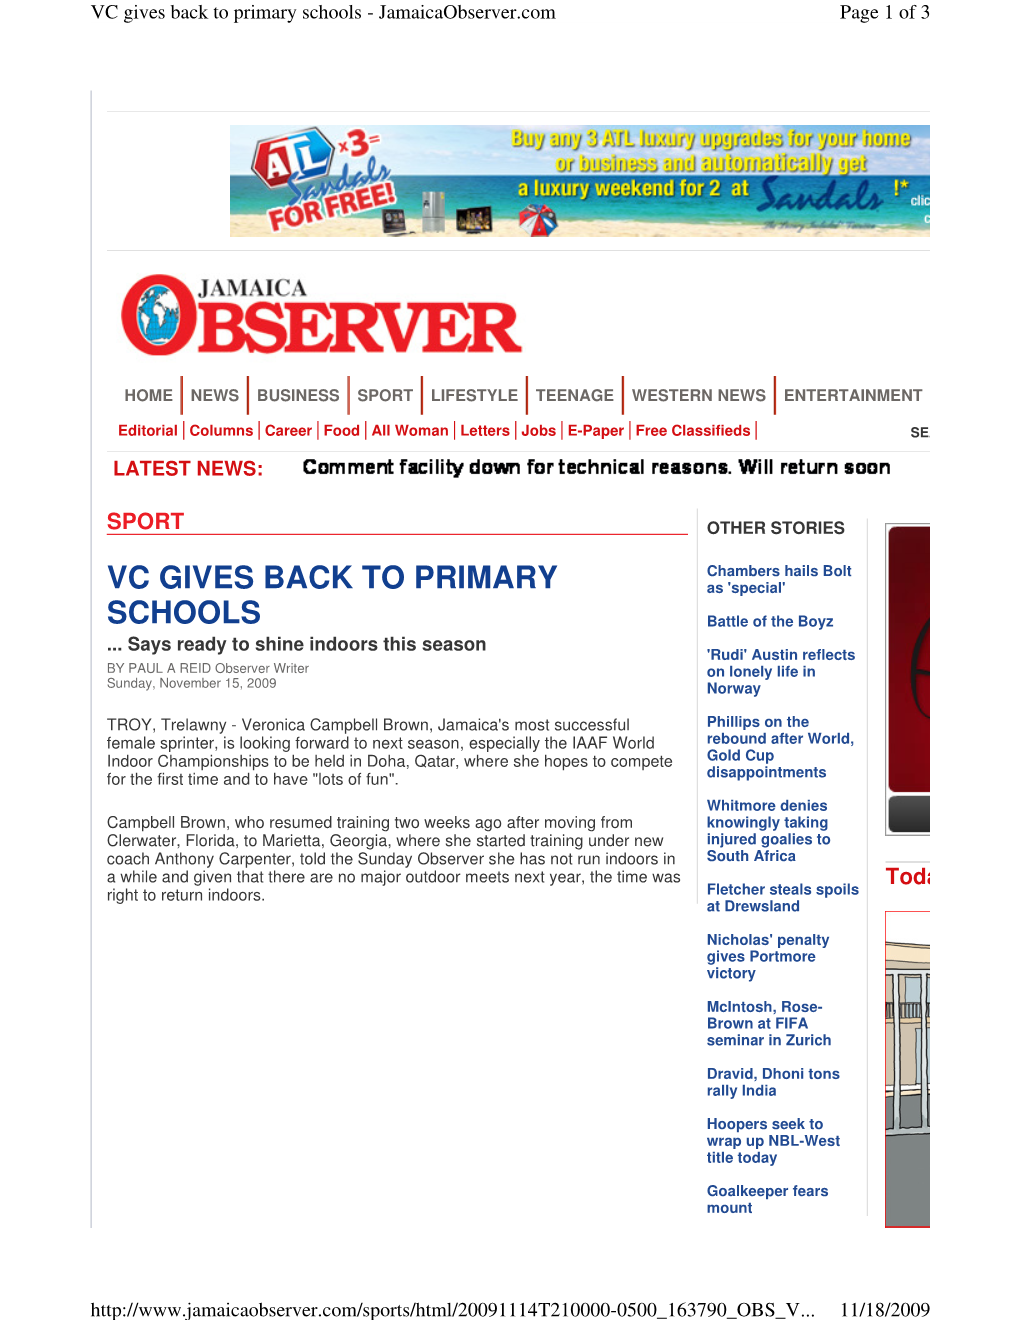 VC Gives Back to Primary Schools - Jamaicaobserver.Com Page 1 of 3